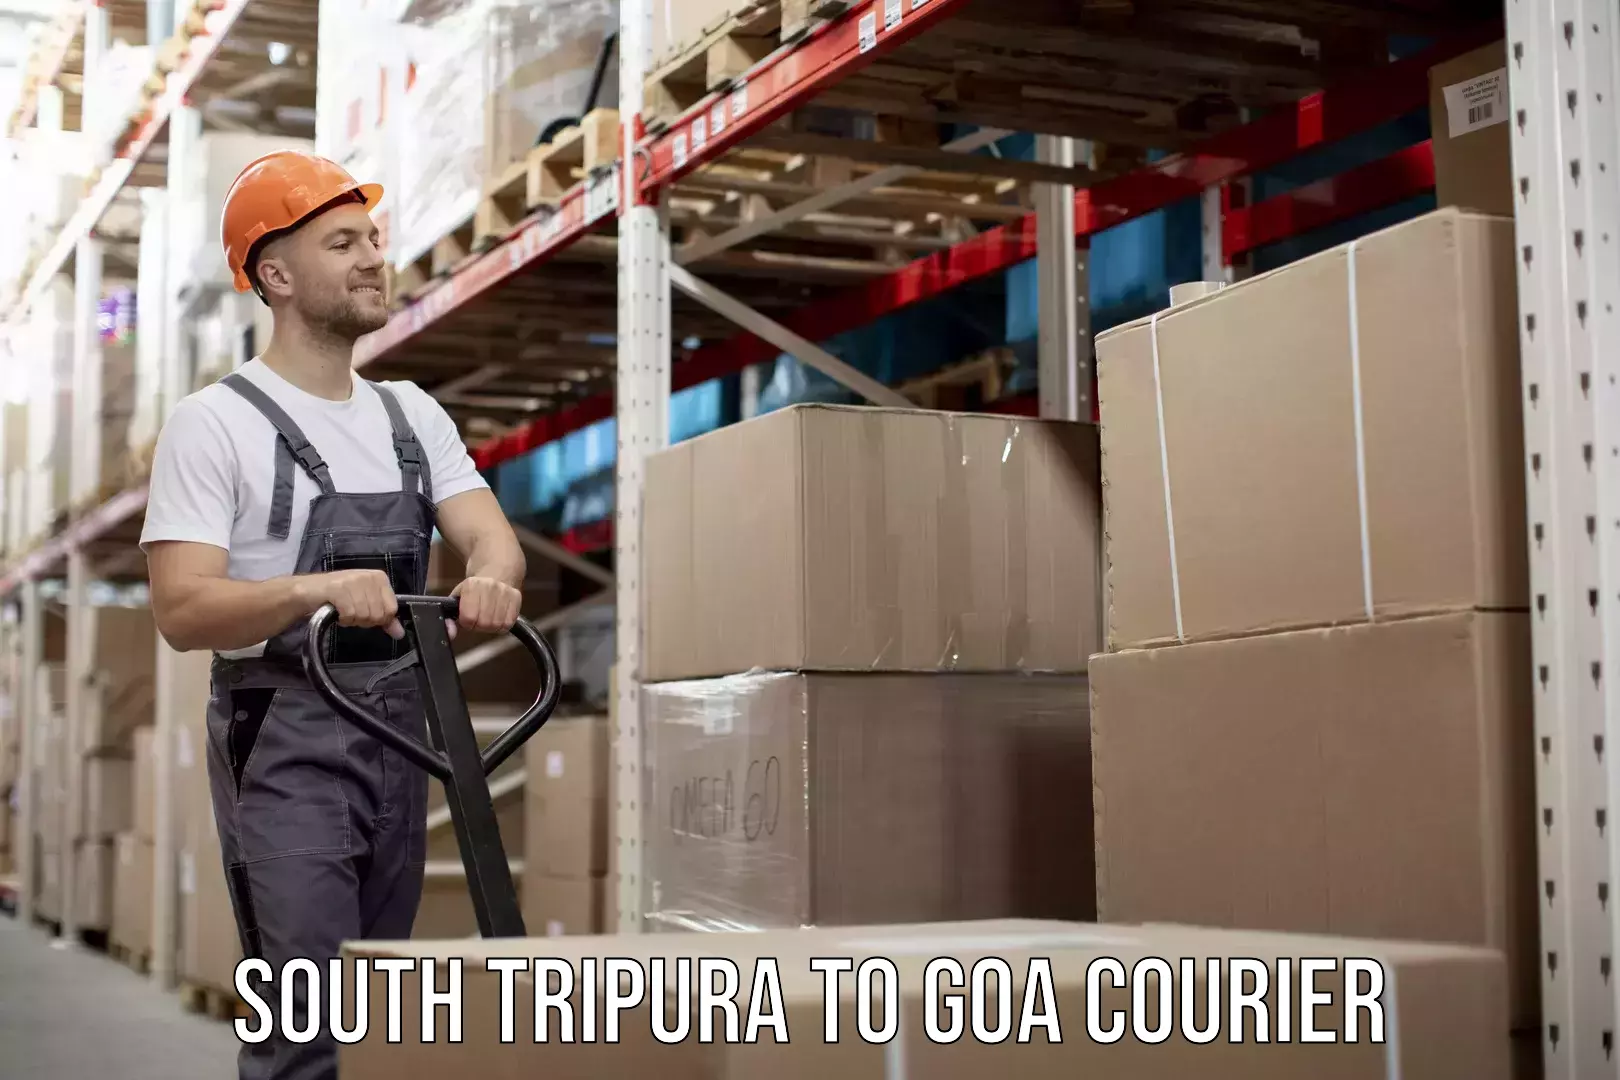 Courier service efficiency South Tripura to Goa